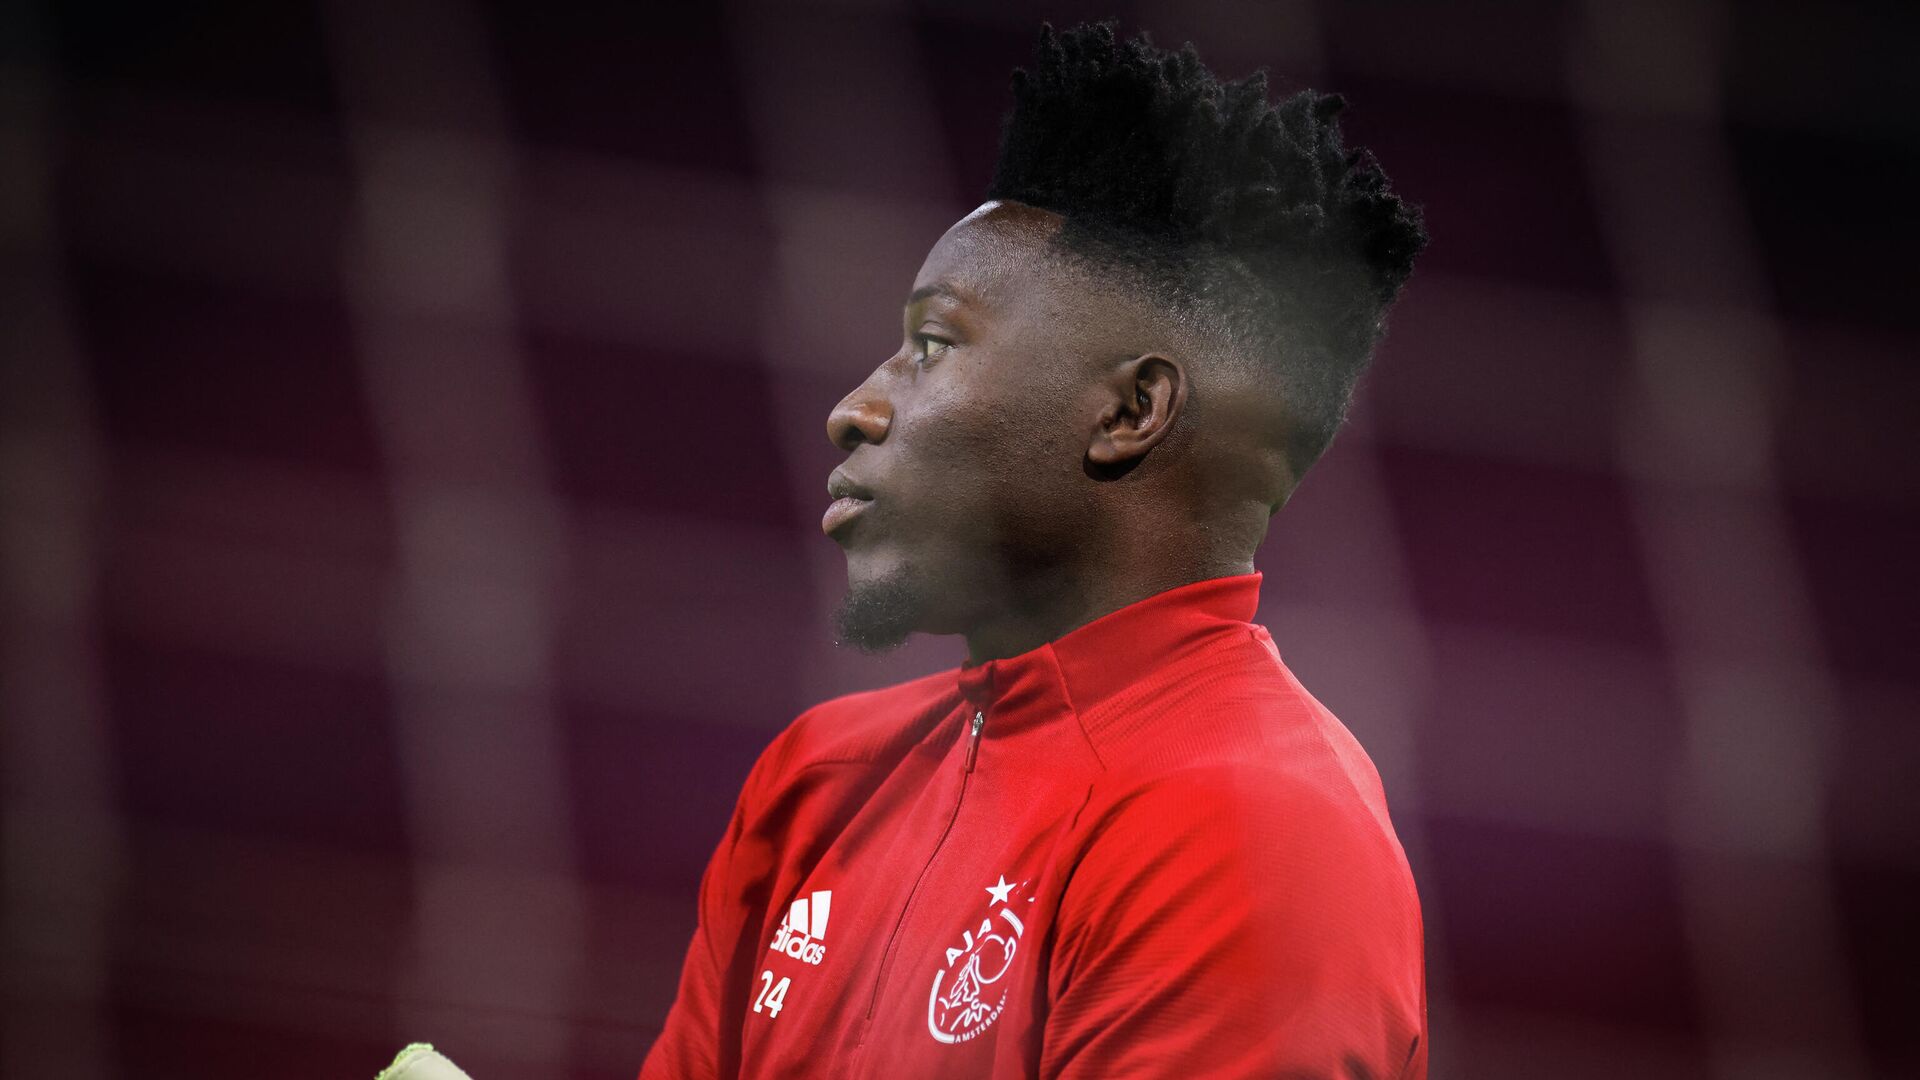 Ajax's Cameroonian goalkeeper Andre Onana looks on during the warm-up session prior to the UEFA Champions League Group D football match between Ajax and FC Midtjylland at the Johan Cruijff stadium, in Amsterdam, on November 25, 2020. (Photo by Kenzo Tribouillard / AFP) - РИА Новости, 1920, 02.09.2021